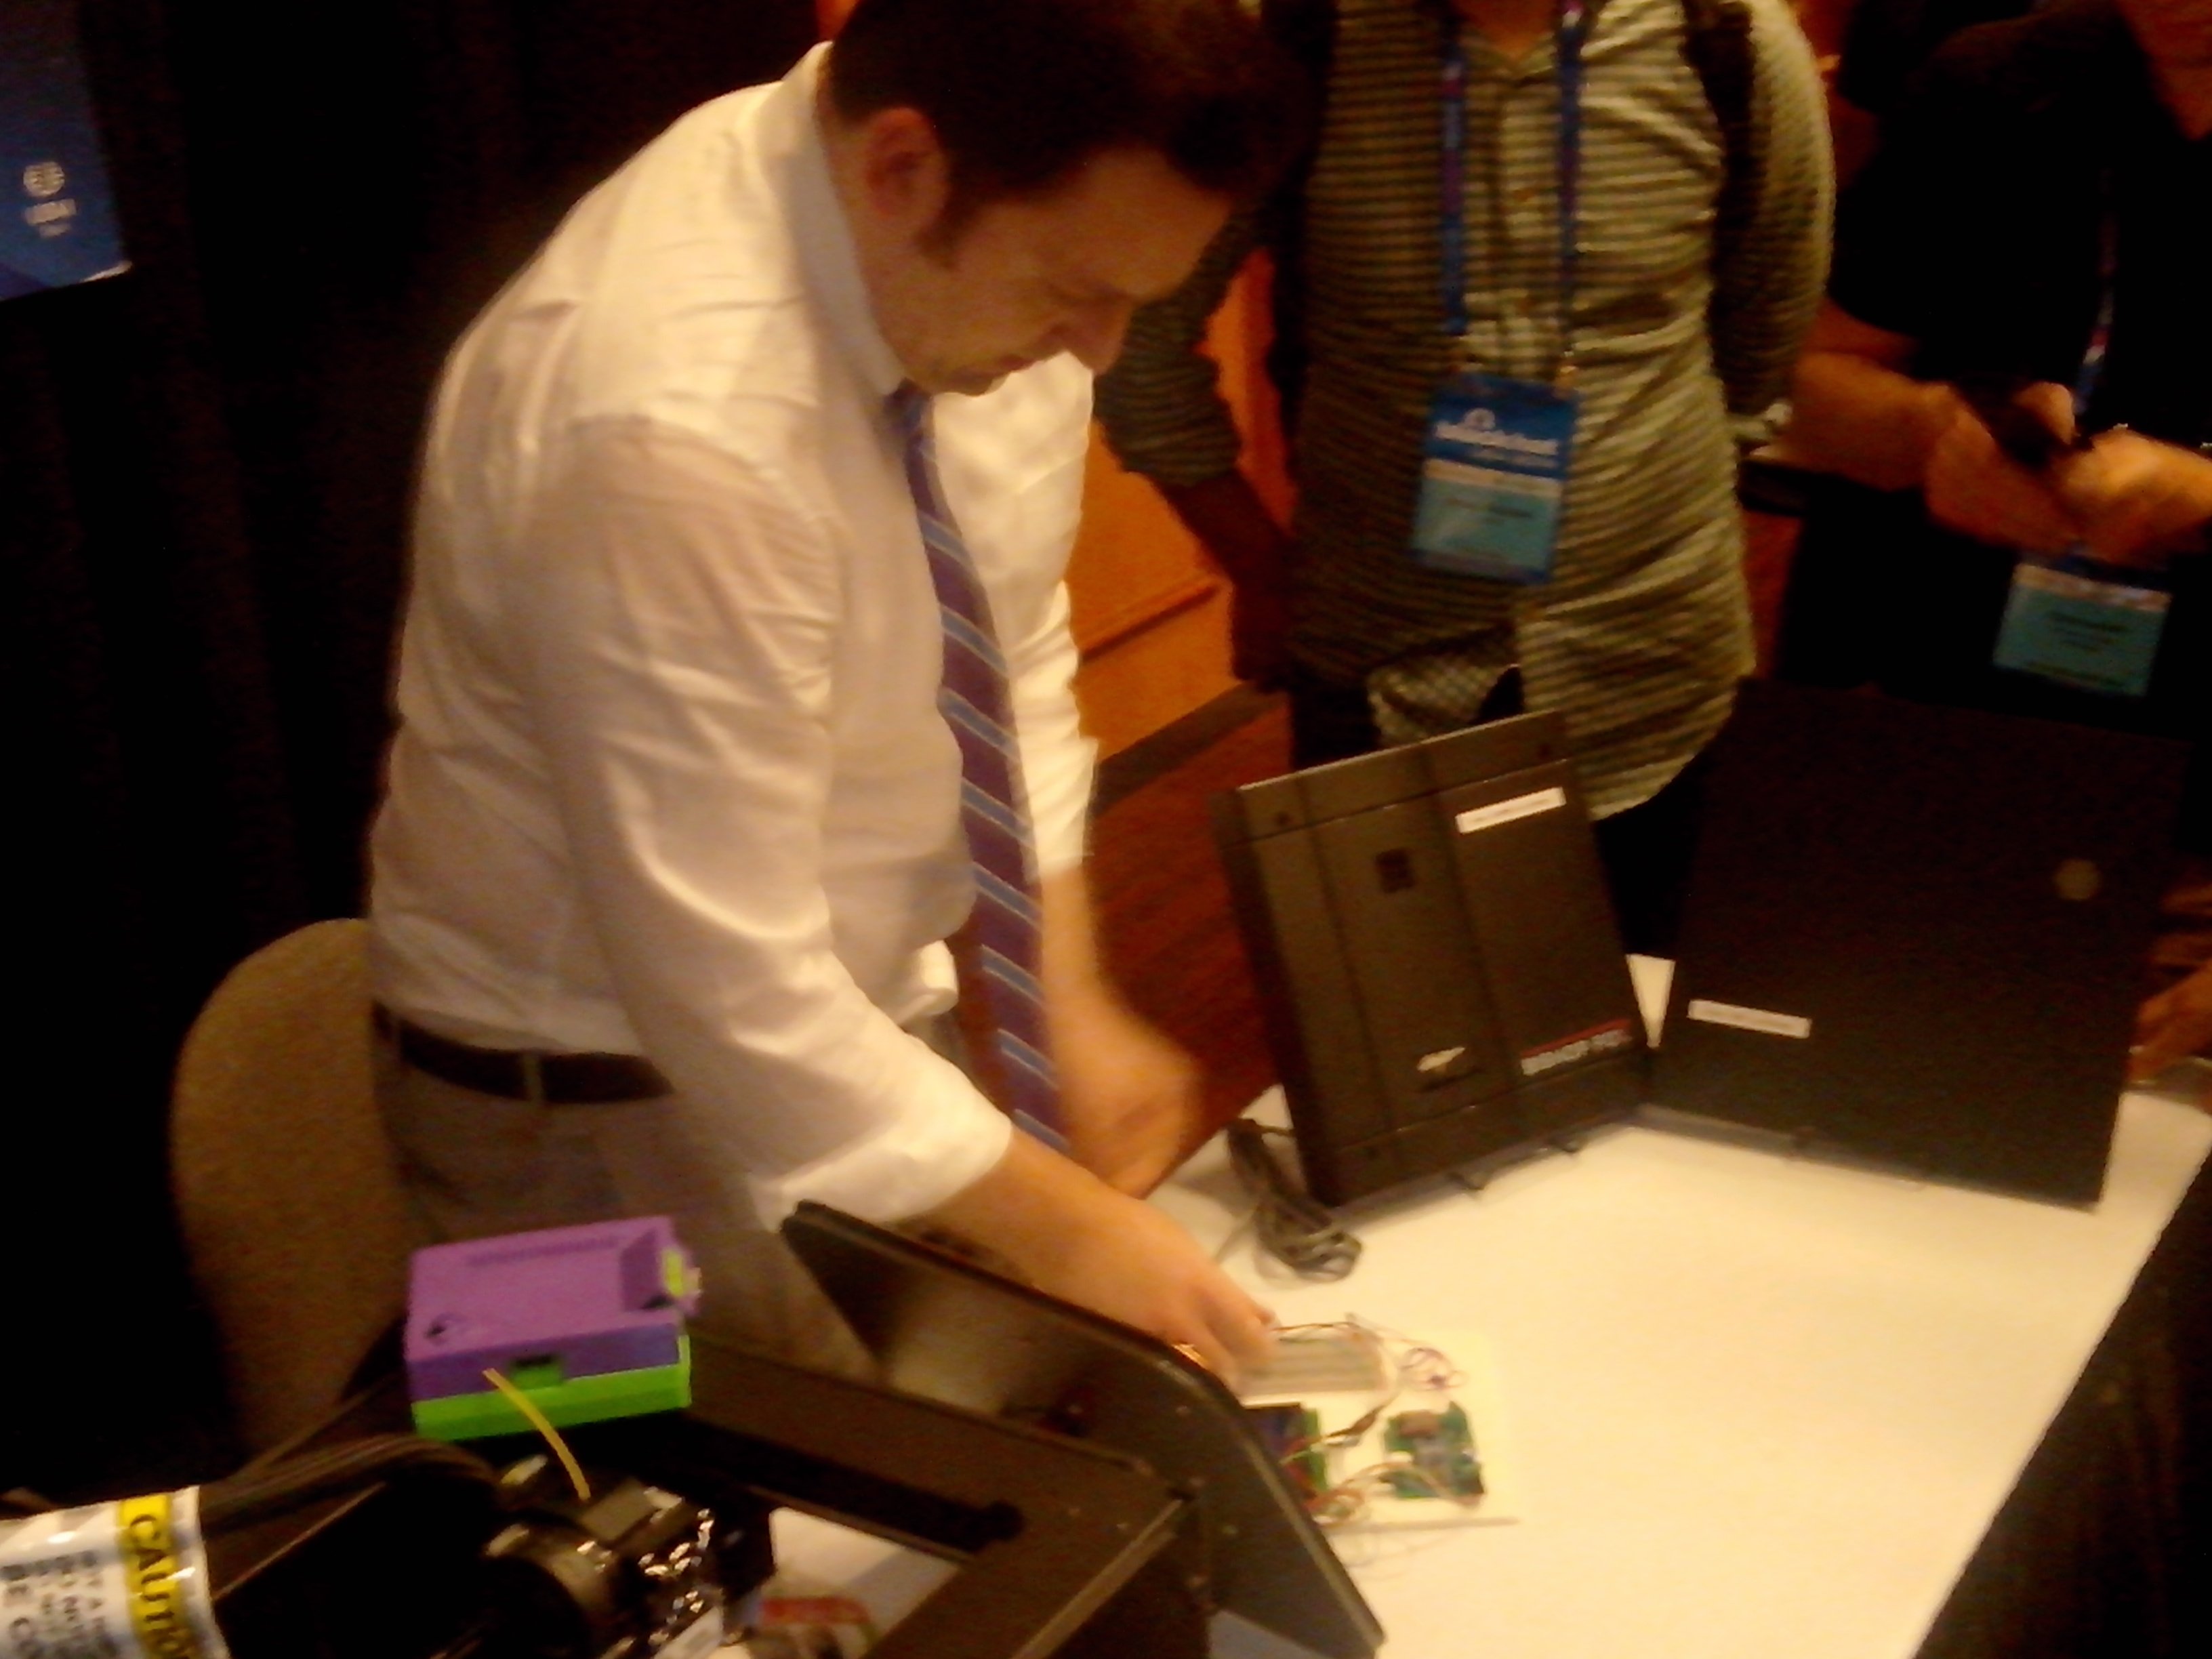 Tastic RFID Thief – Demo of Weaponized HID Indala and iCLASS long-range readers at Black Hat USA 2014 – Tool Arsenal - 06Aug2014.